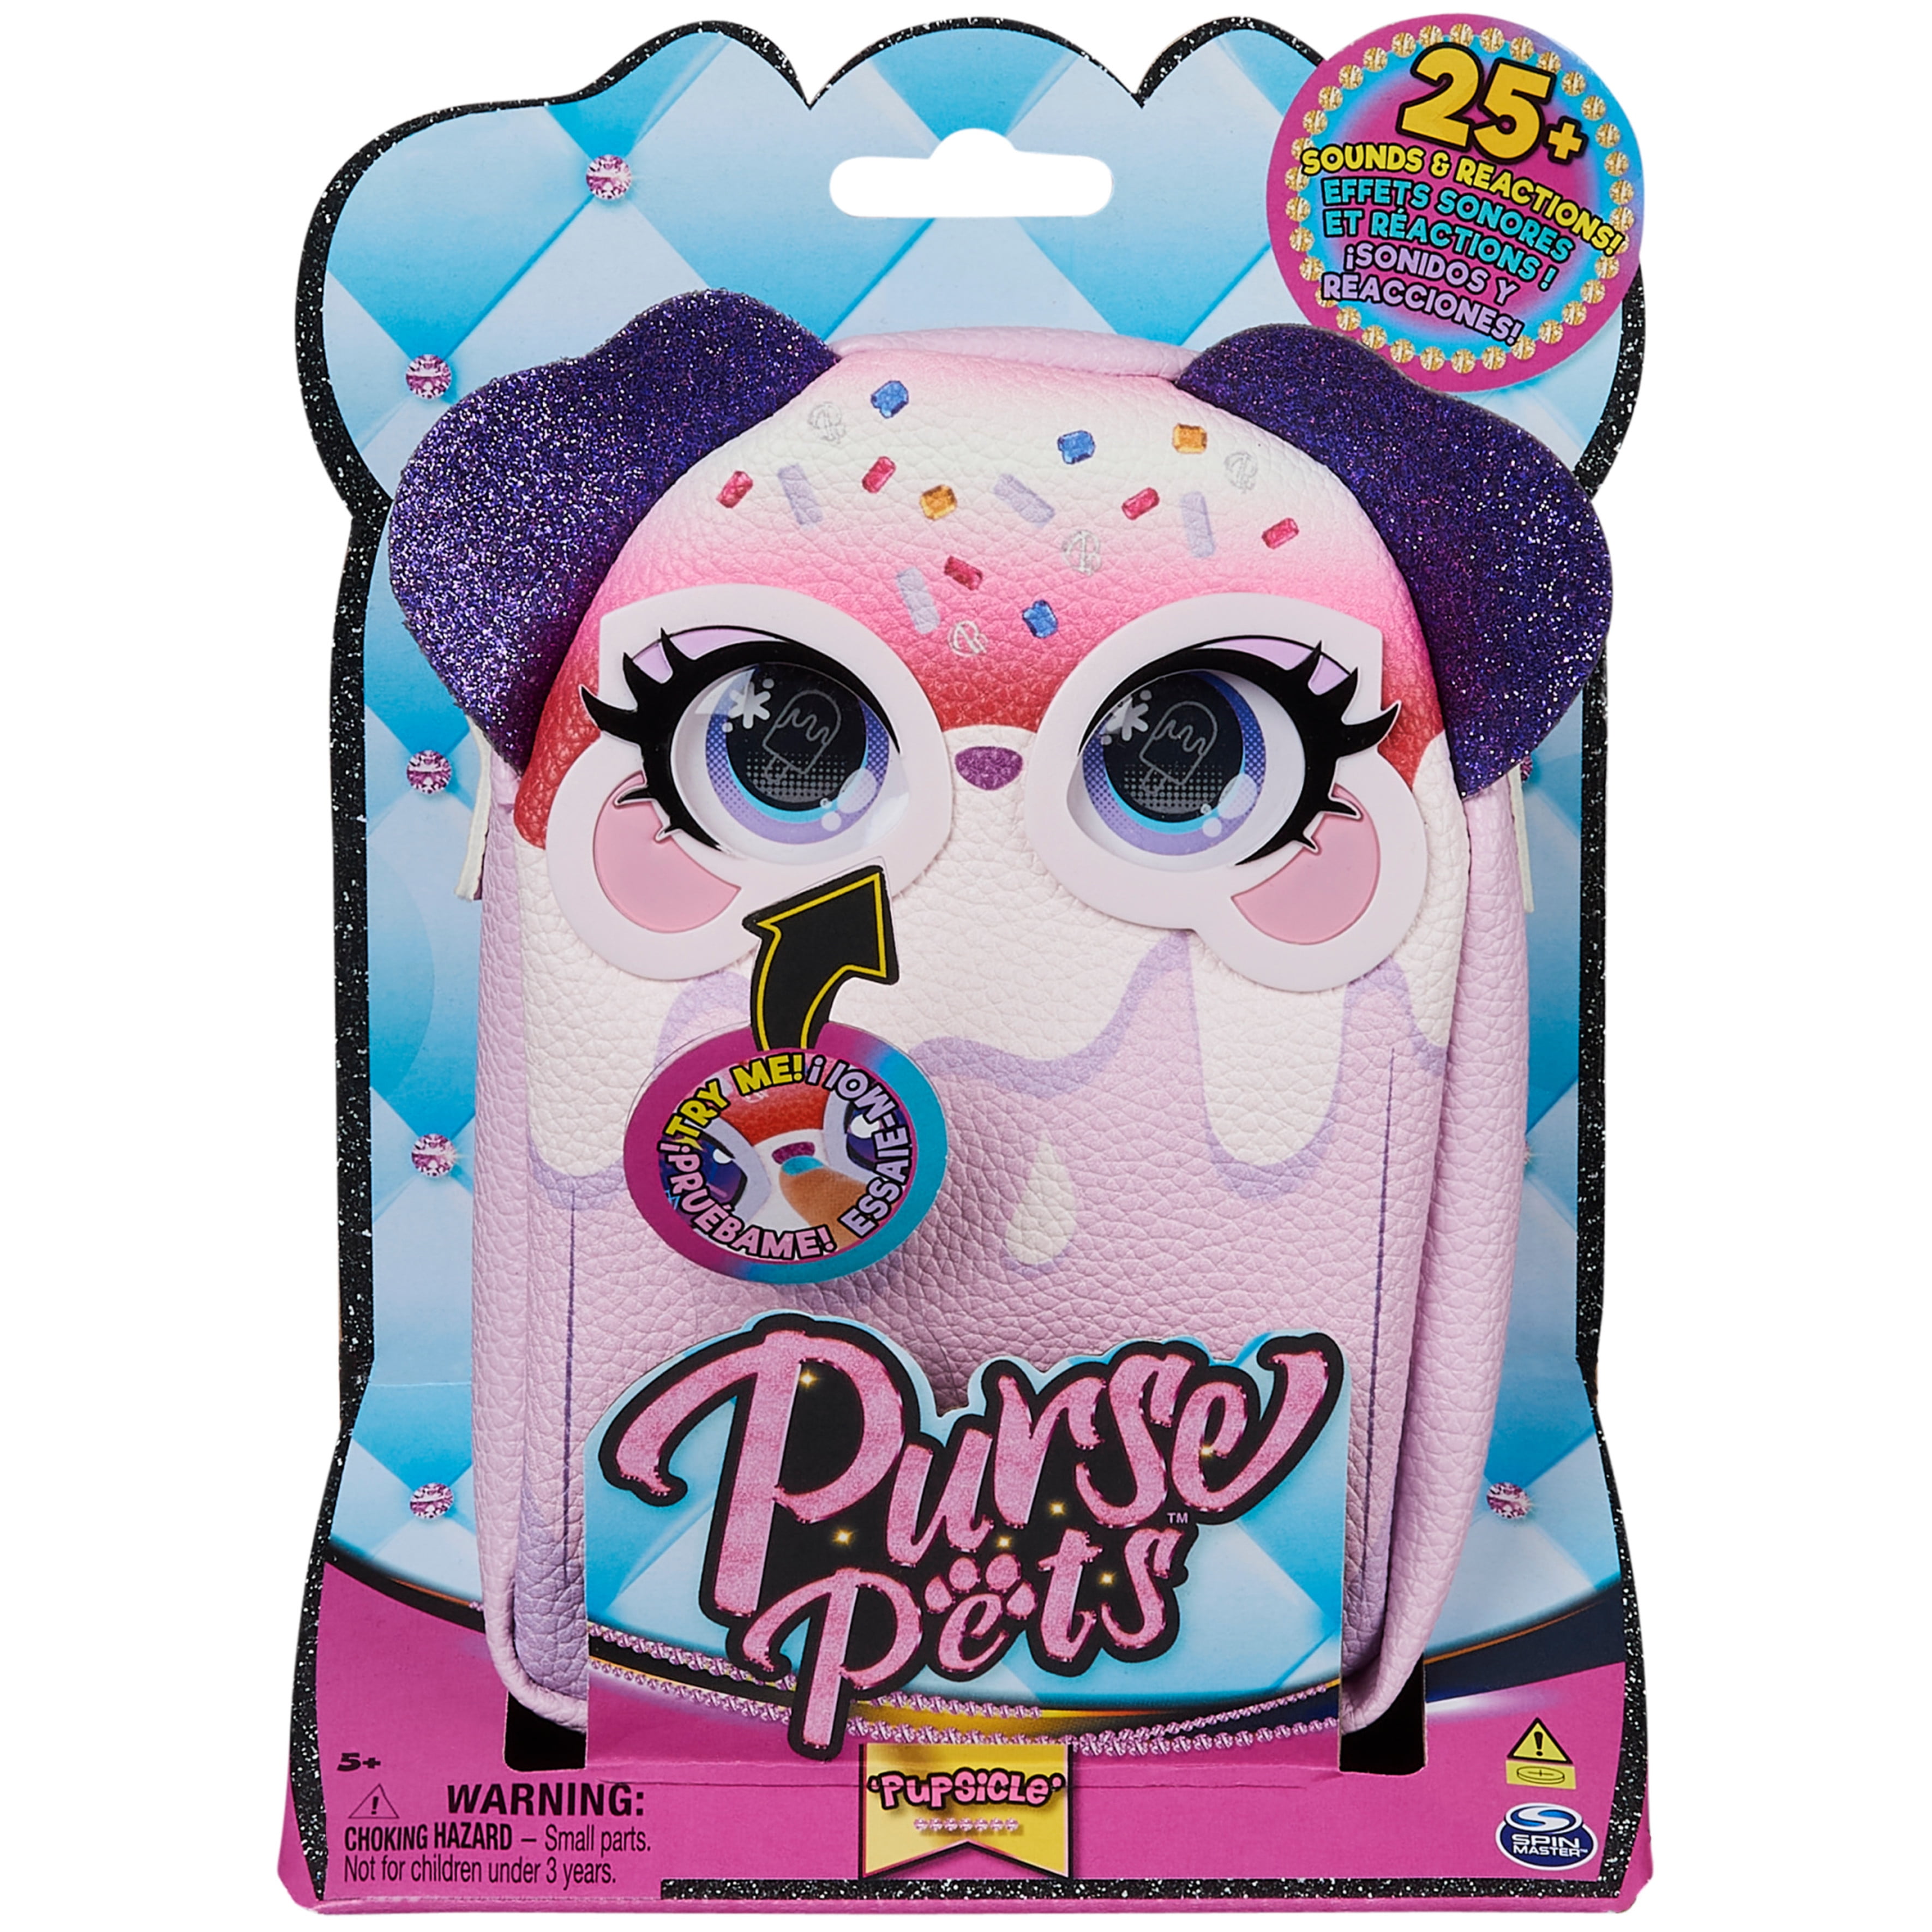 Purse Pets Pupsicle with Lights and over 25 Sounds Reactions 25d8f07e 2cc3 4489 b02e 03b9aa71c4af.94befffda3eaaa00f42d7aec96a50e91